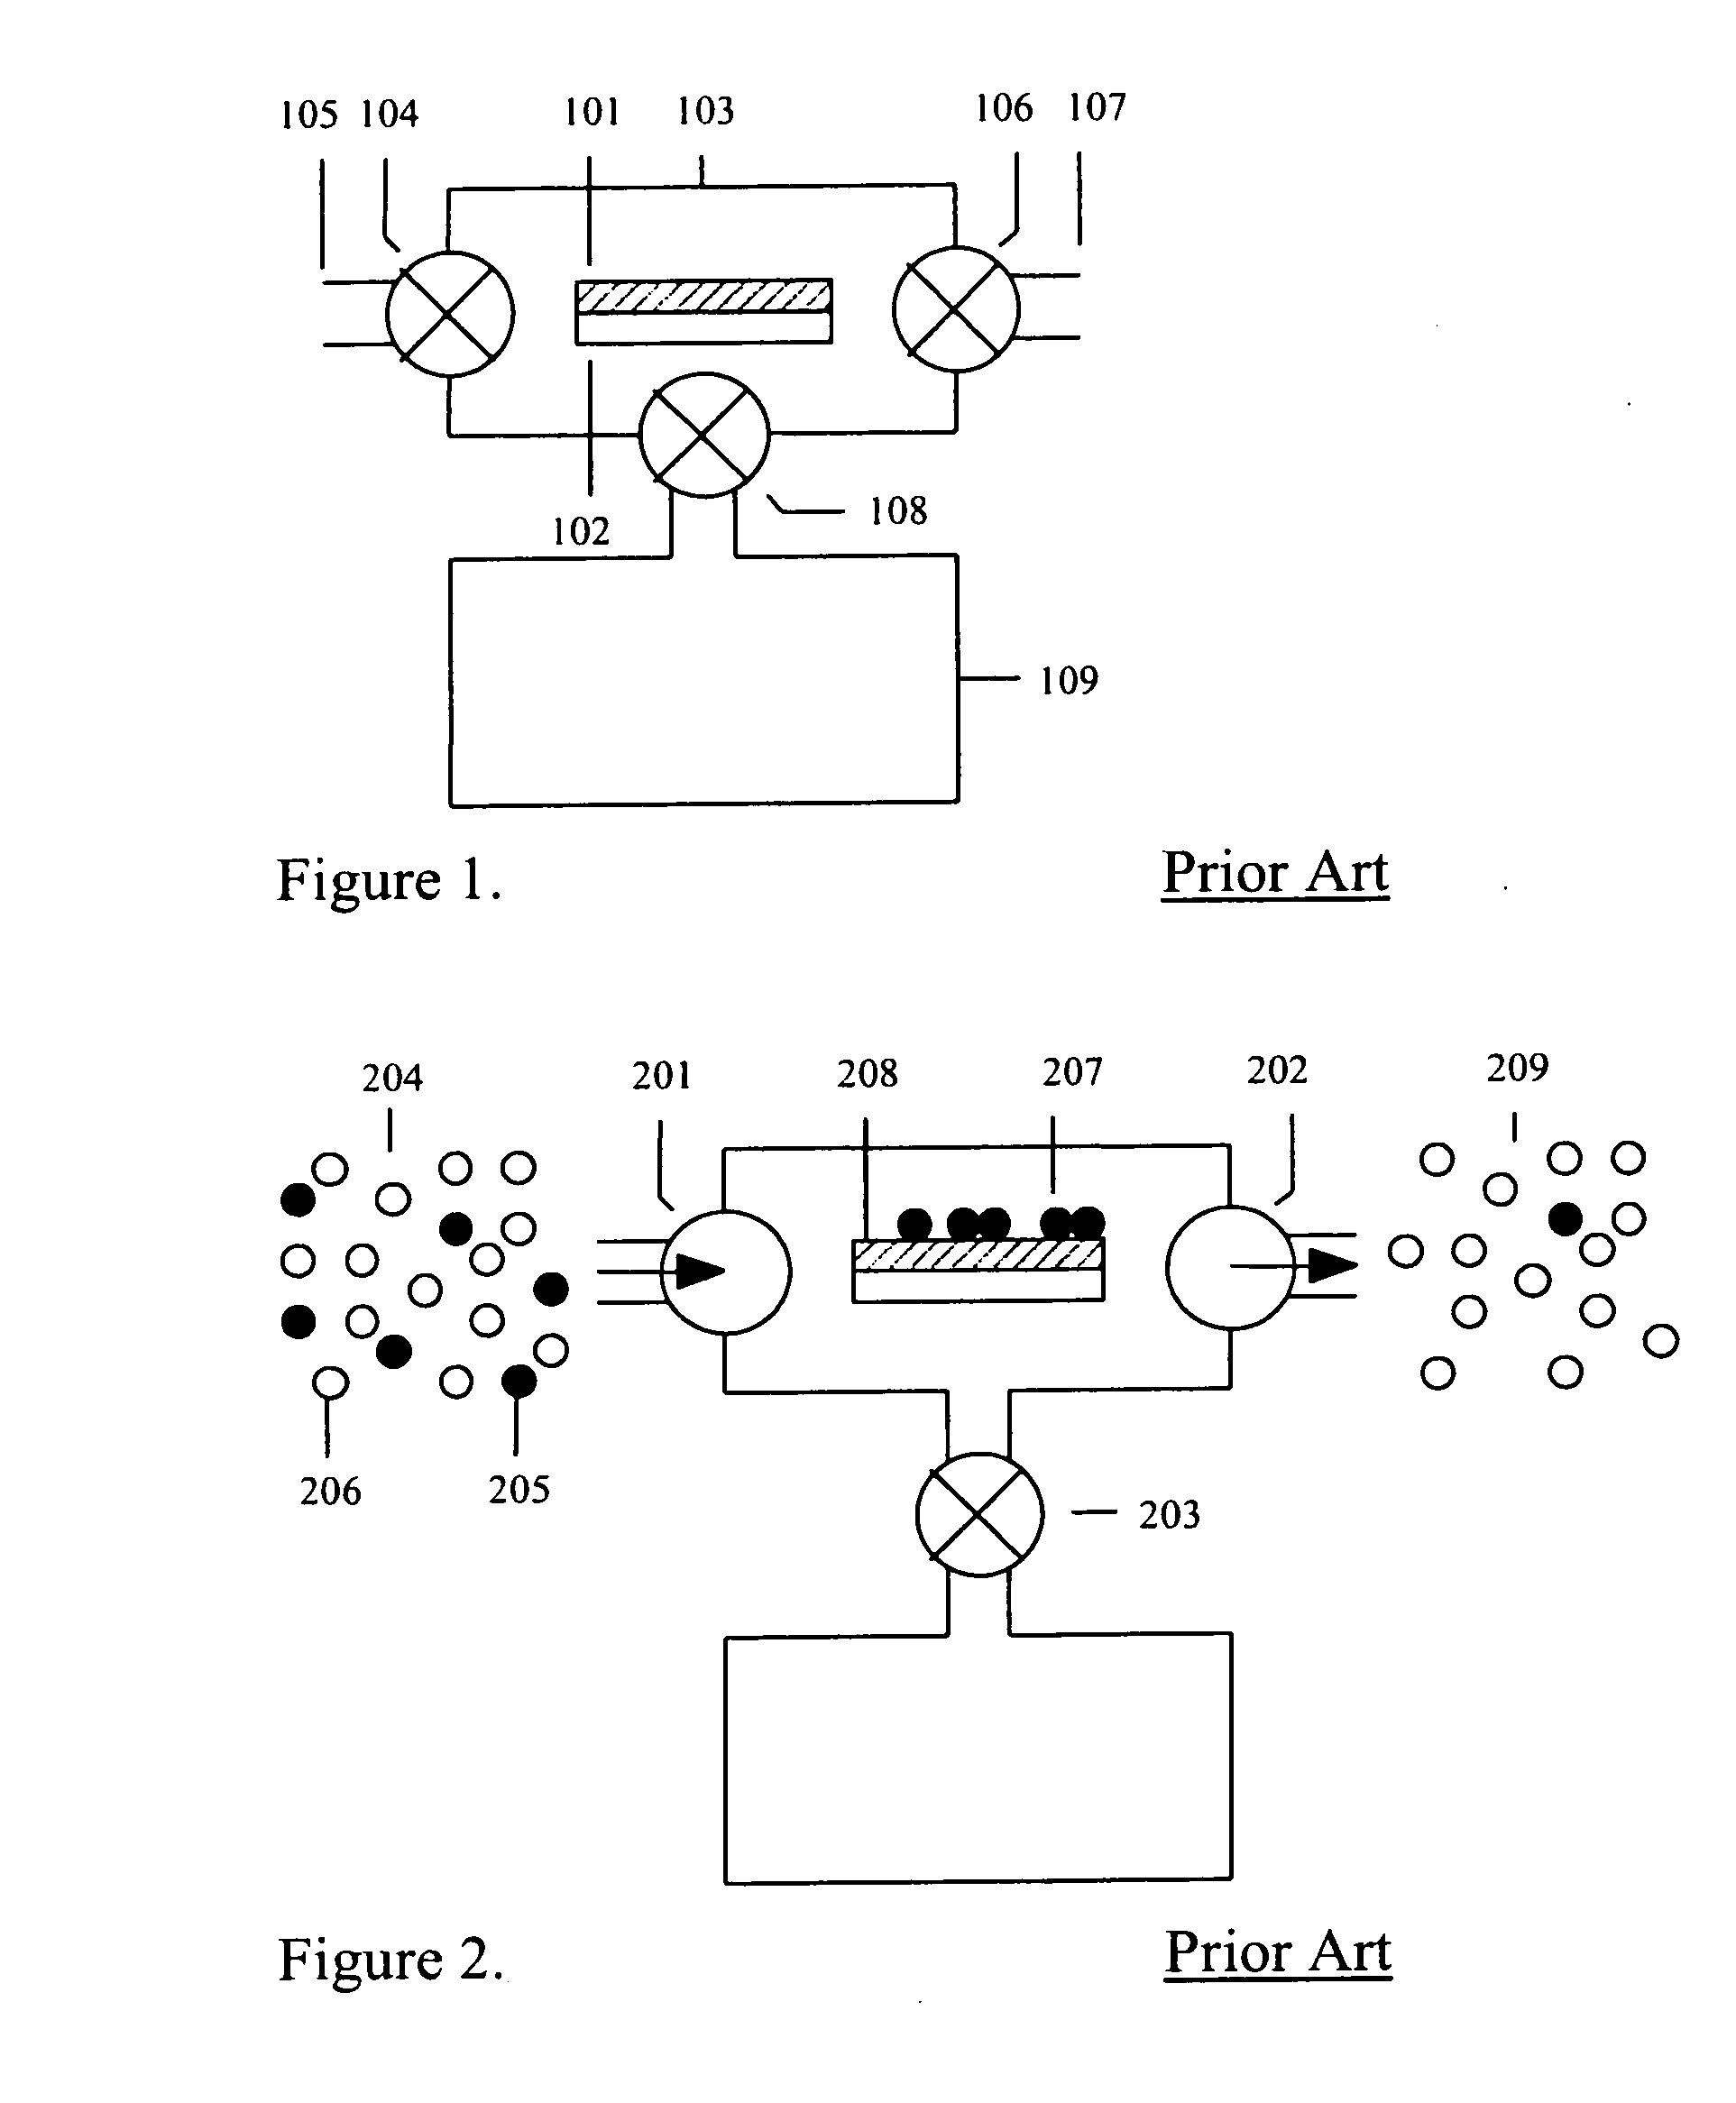 Pre-concentrator and sample interface